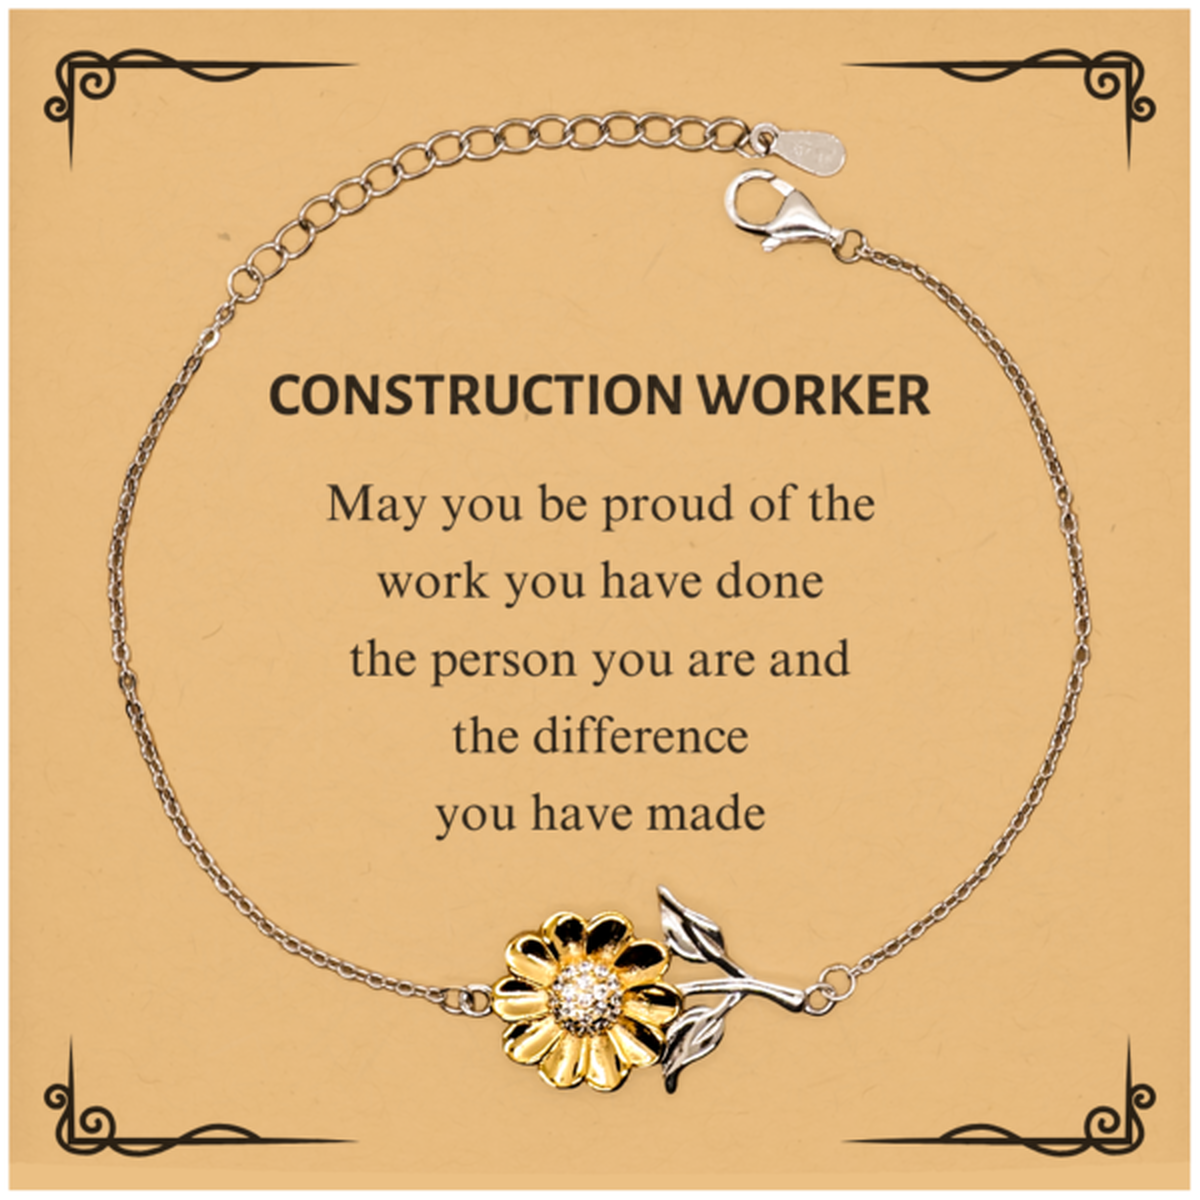 Construction Worker May you be proud of the work you have done, Retirement Construction Worker Sunflower Bracelet for Colleague Appreciation Gifts Amazing for Construction Worker